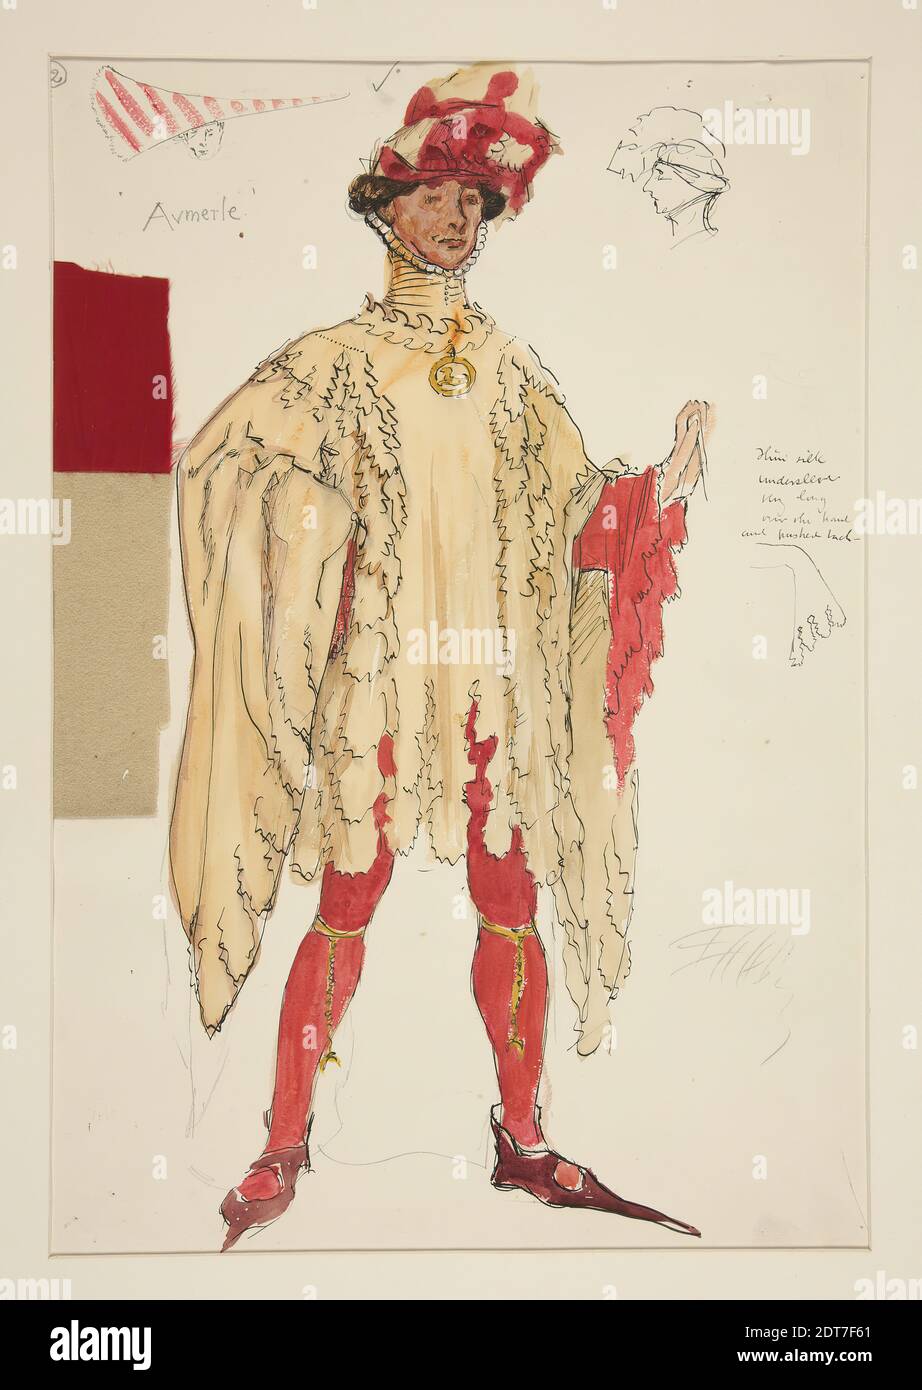 Artist: Edwin Austin Abbey, American, 1852–1911, M.A., 1897, Aumerle, costume sketch for Henry Irving’s Planned Productino of King Richard II, Watercolor, pen and ink, with fabric, White wove, 36.1 × 25.4 cm (14 3/16 × 10 in.), Made in United States, American, 19th century, Works on Paper - Drawings and Watercolors Stock Photo